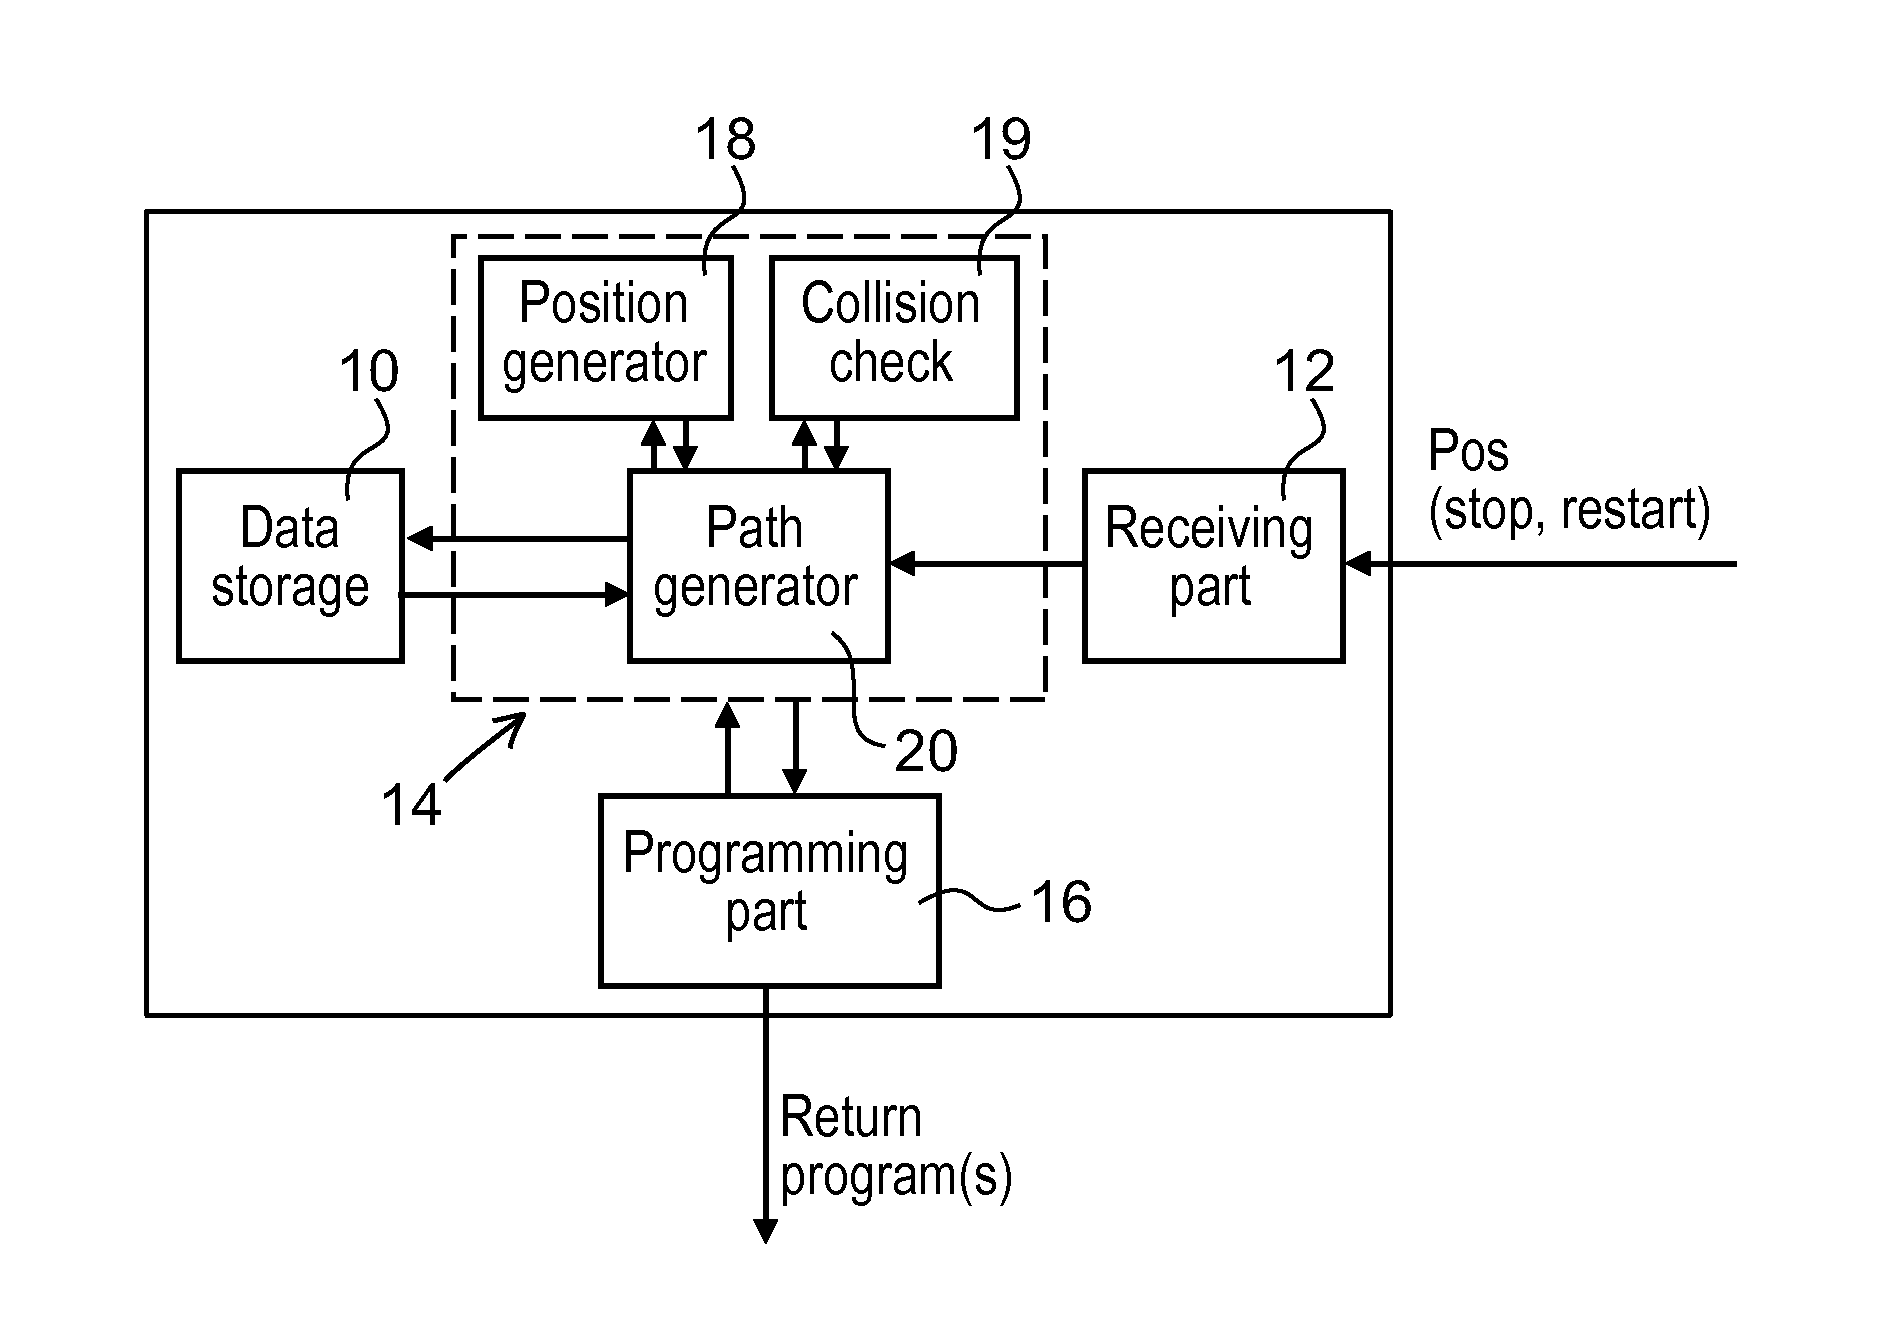 Method And An Apparatus For Automatically Generating A Collision Free Return Program For Returning A Robot From A Stop Position To A Predefined Restart Position